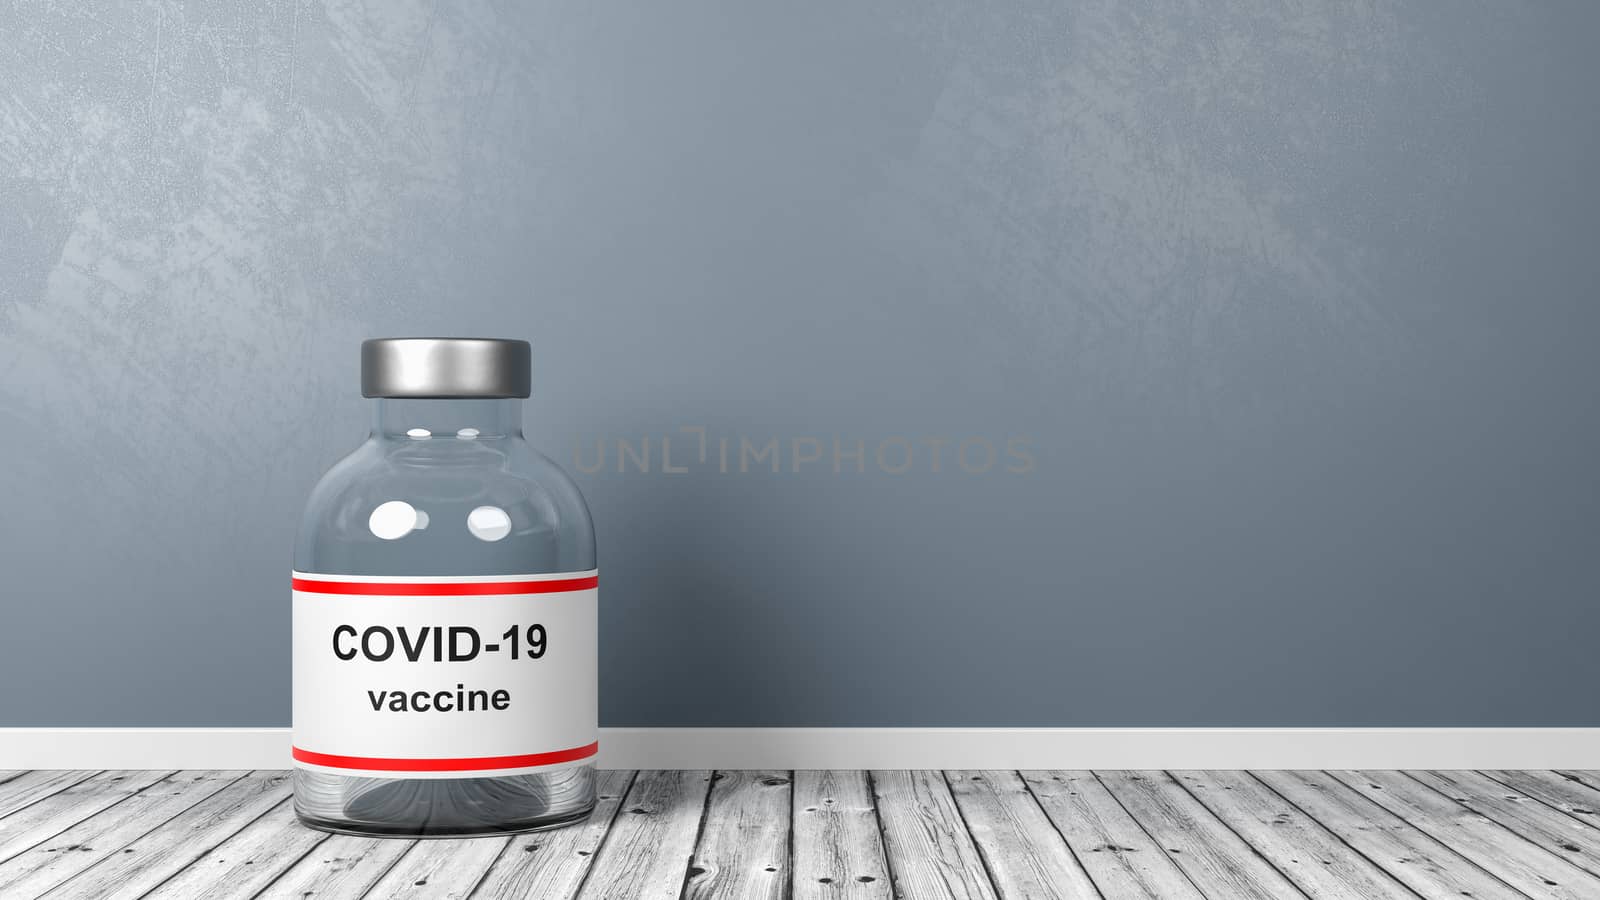 Covid 19 Vaccine Bottle on Wooden Floor in the Room by make